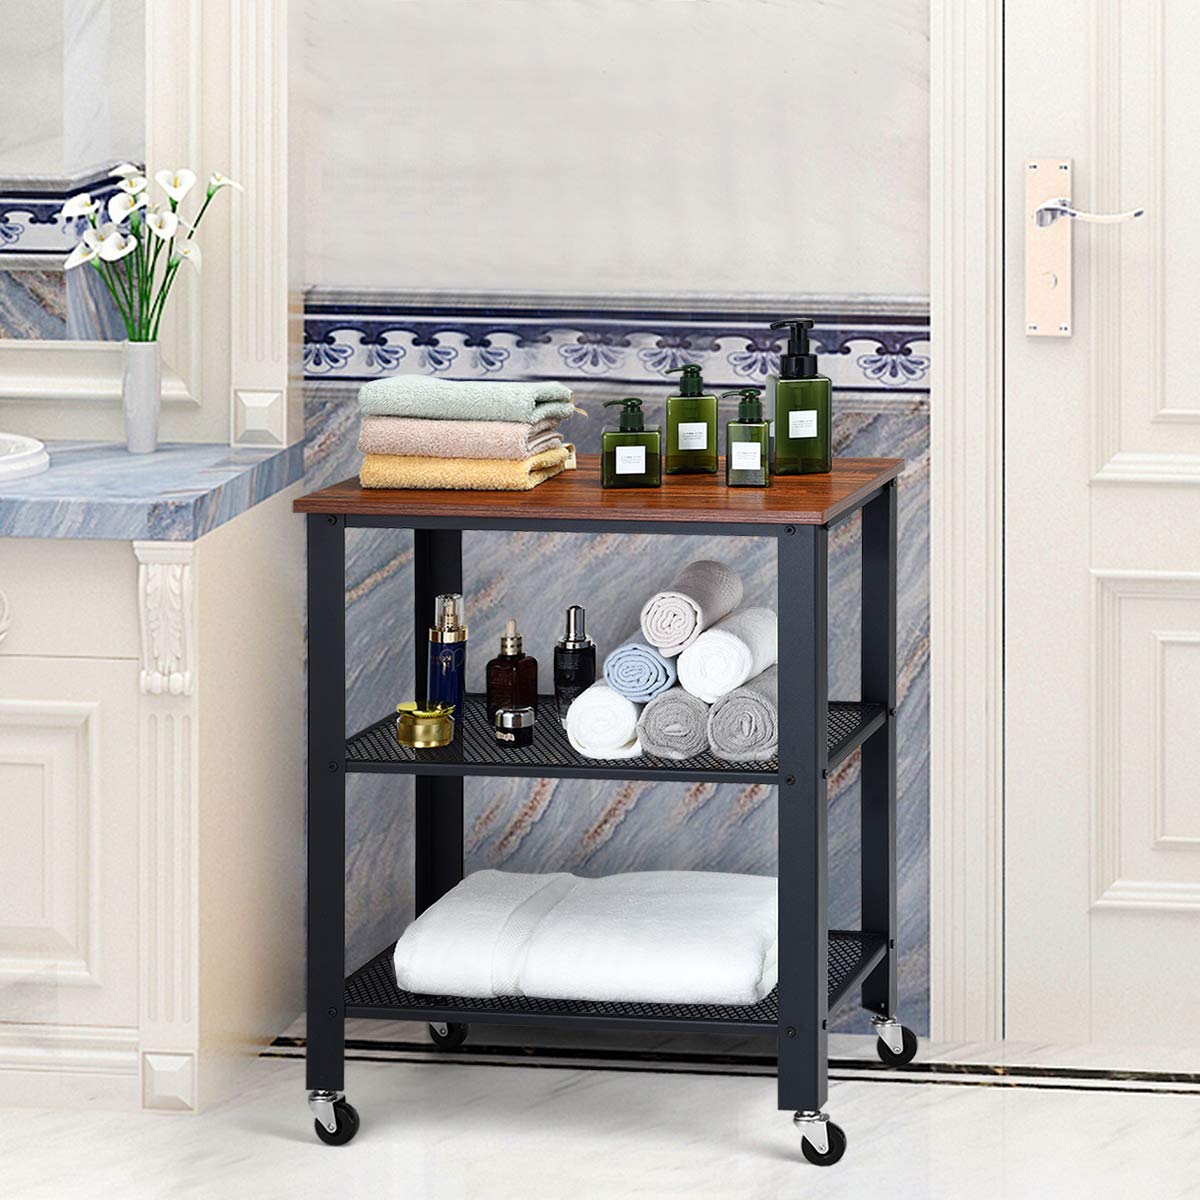 Giantex Kitchen Trolley with 3 Levels, Serving Trolley with 2 Universal Wheels